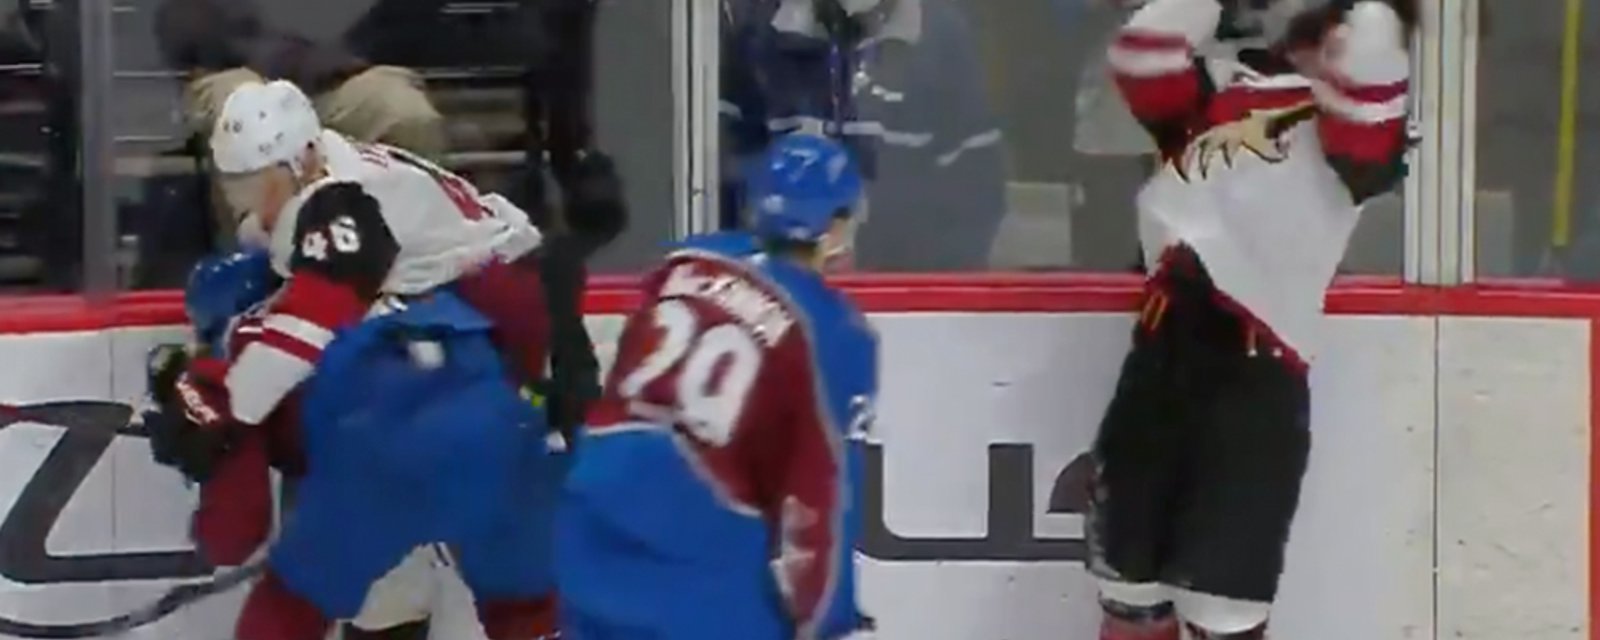 MacKinnon absolutely loses it, throws helmet at Garland's face